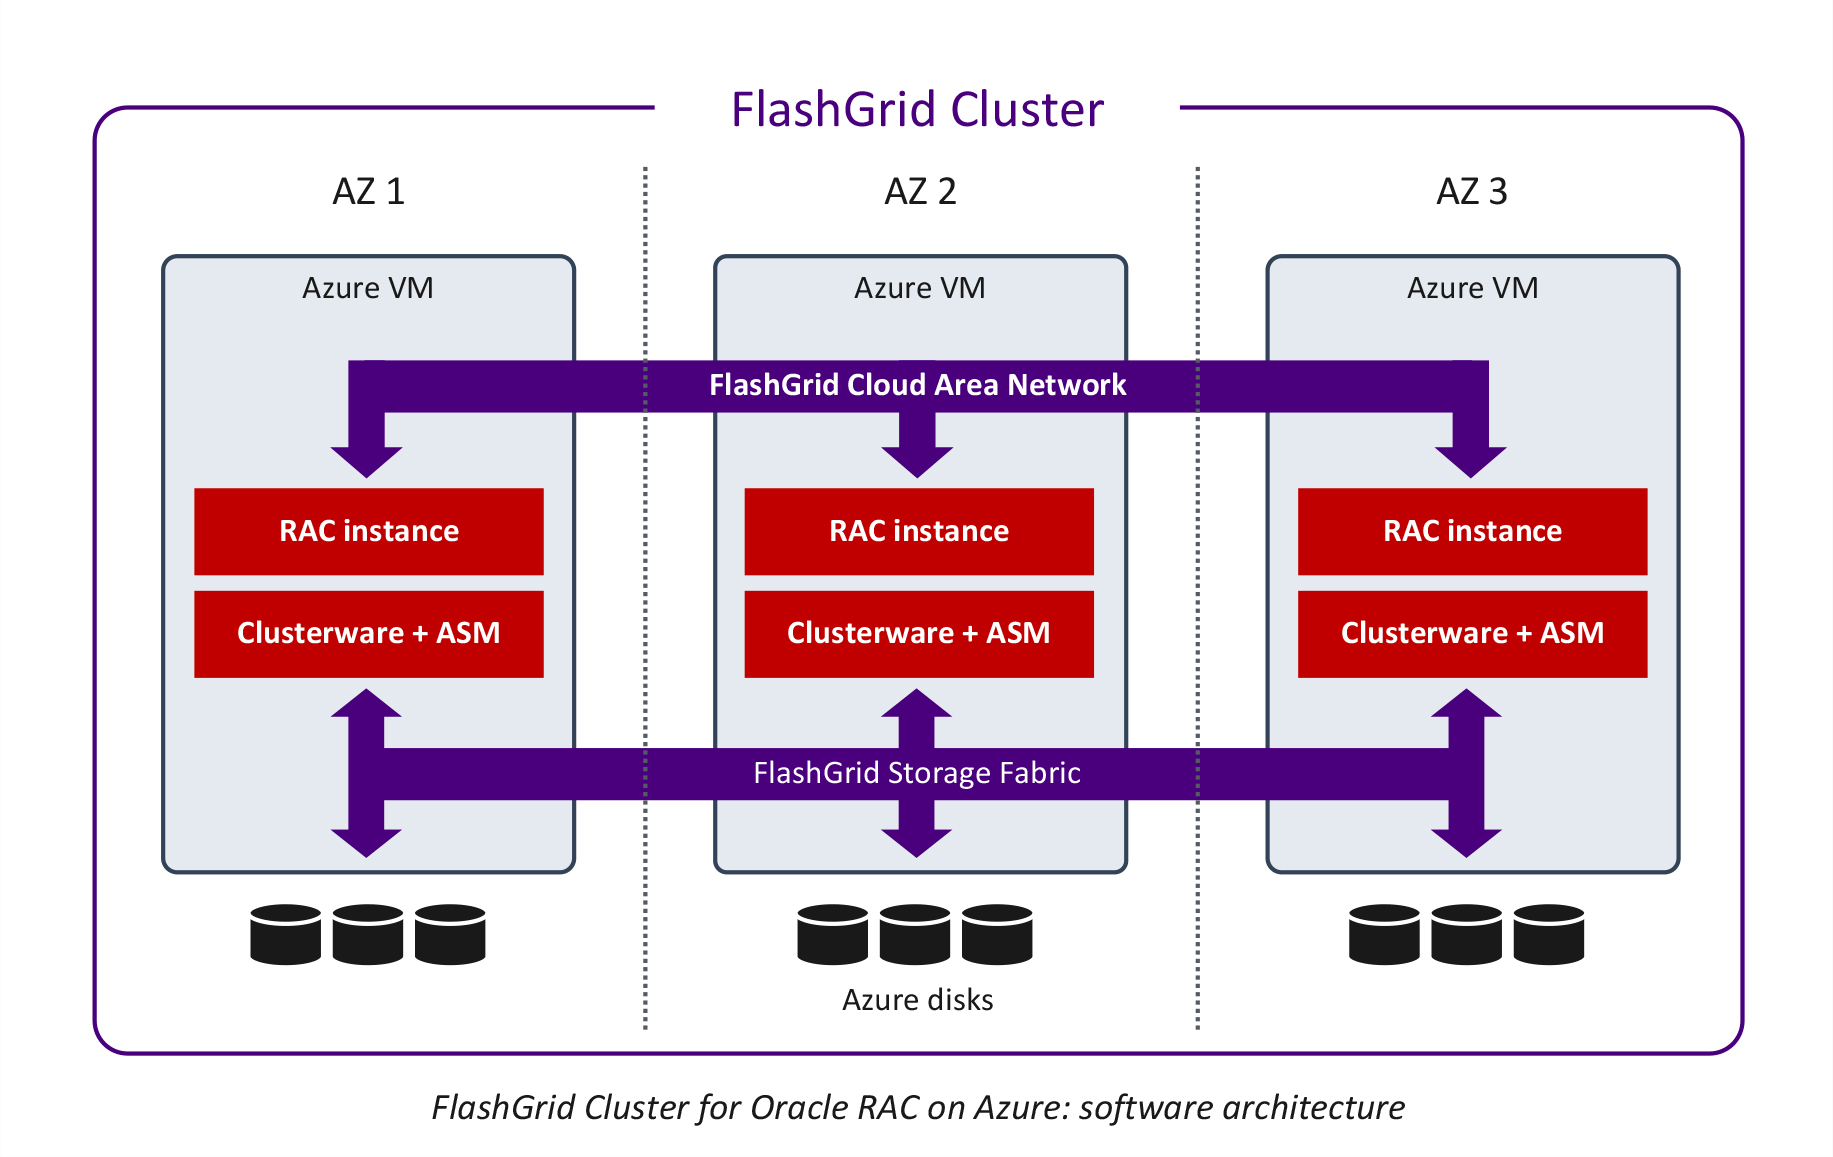 FlashGrid Cluster for Oracle RAC on Azure - Architecture